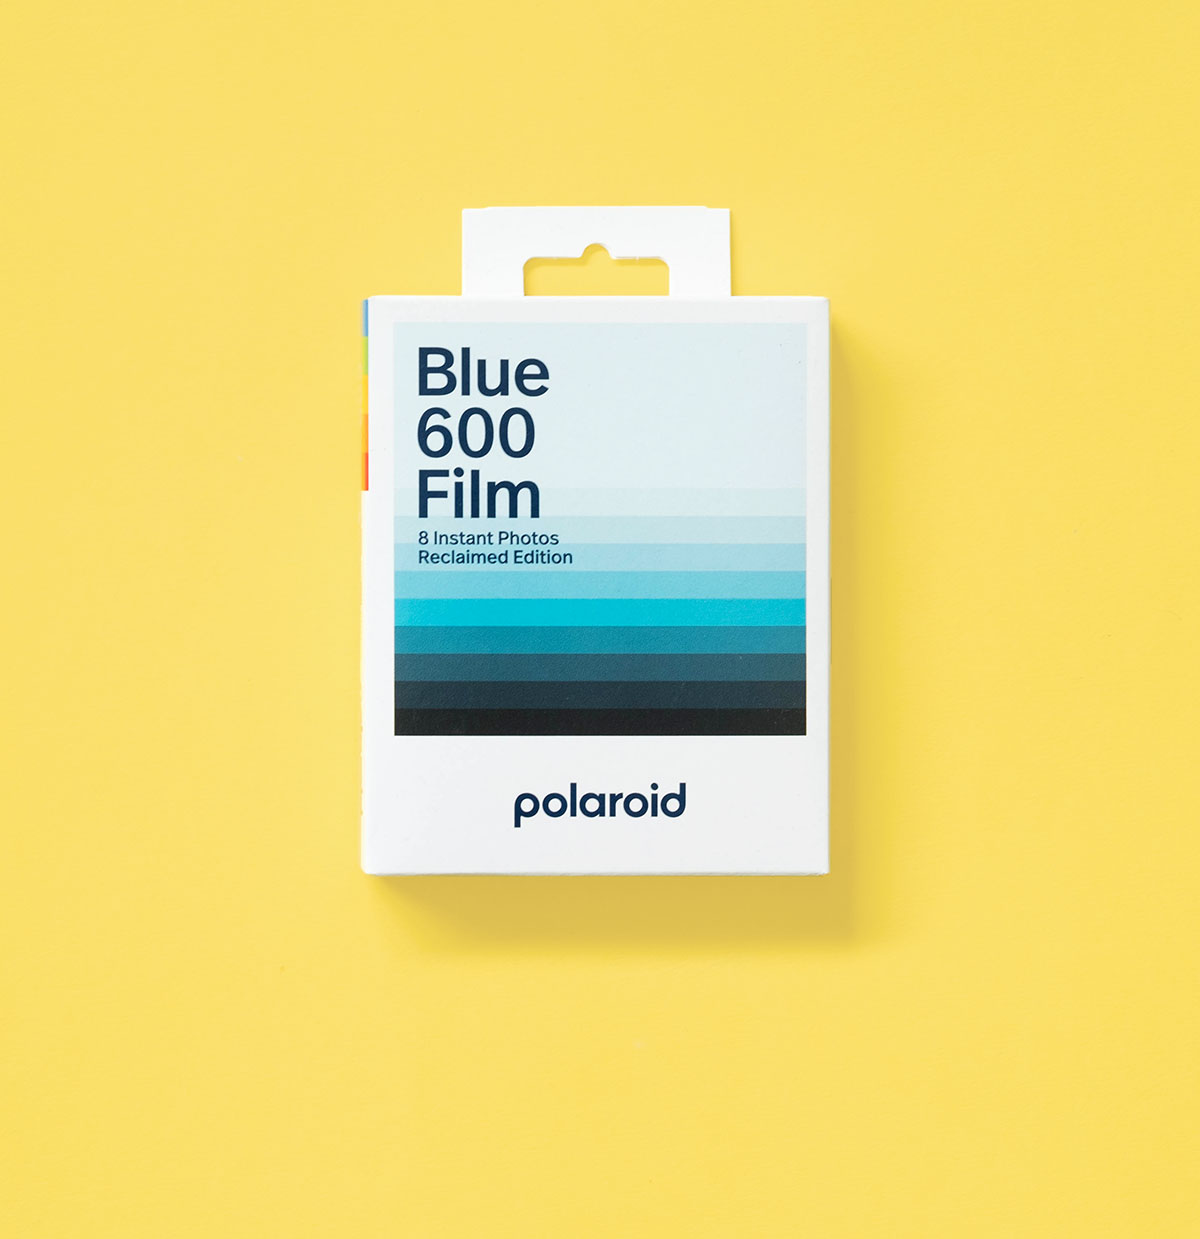 Polaroid Reclaimed Blue 600 Film Guide: Review and Shooting Tips